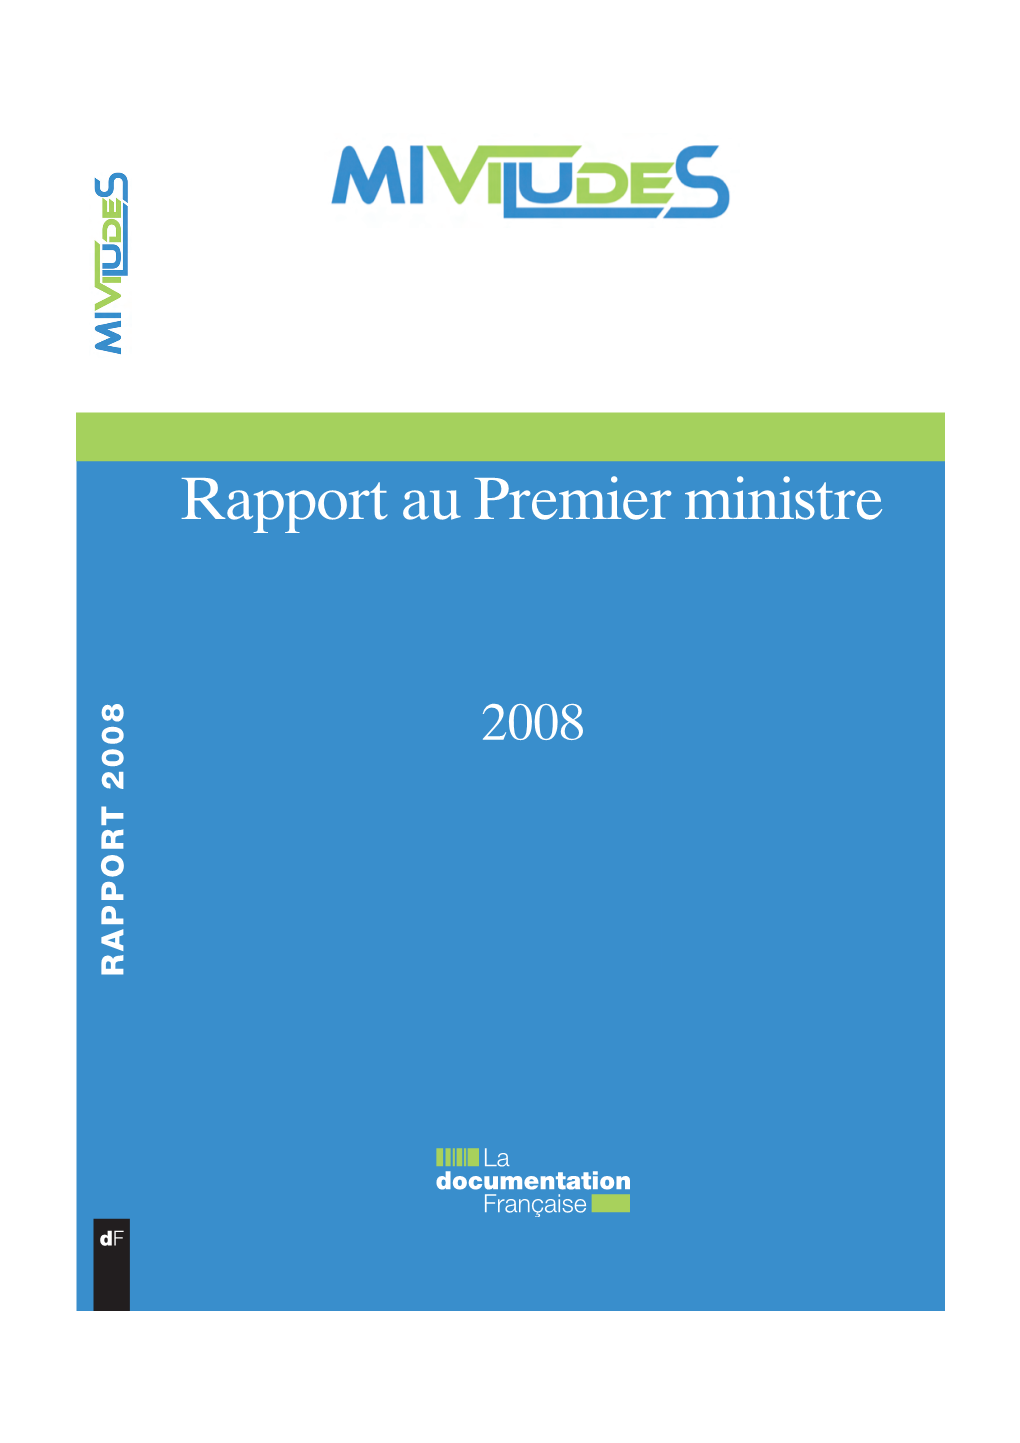 Miviludes Rapport 2008.Indd 2 23/04/2009 09:27:33 Sommaire